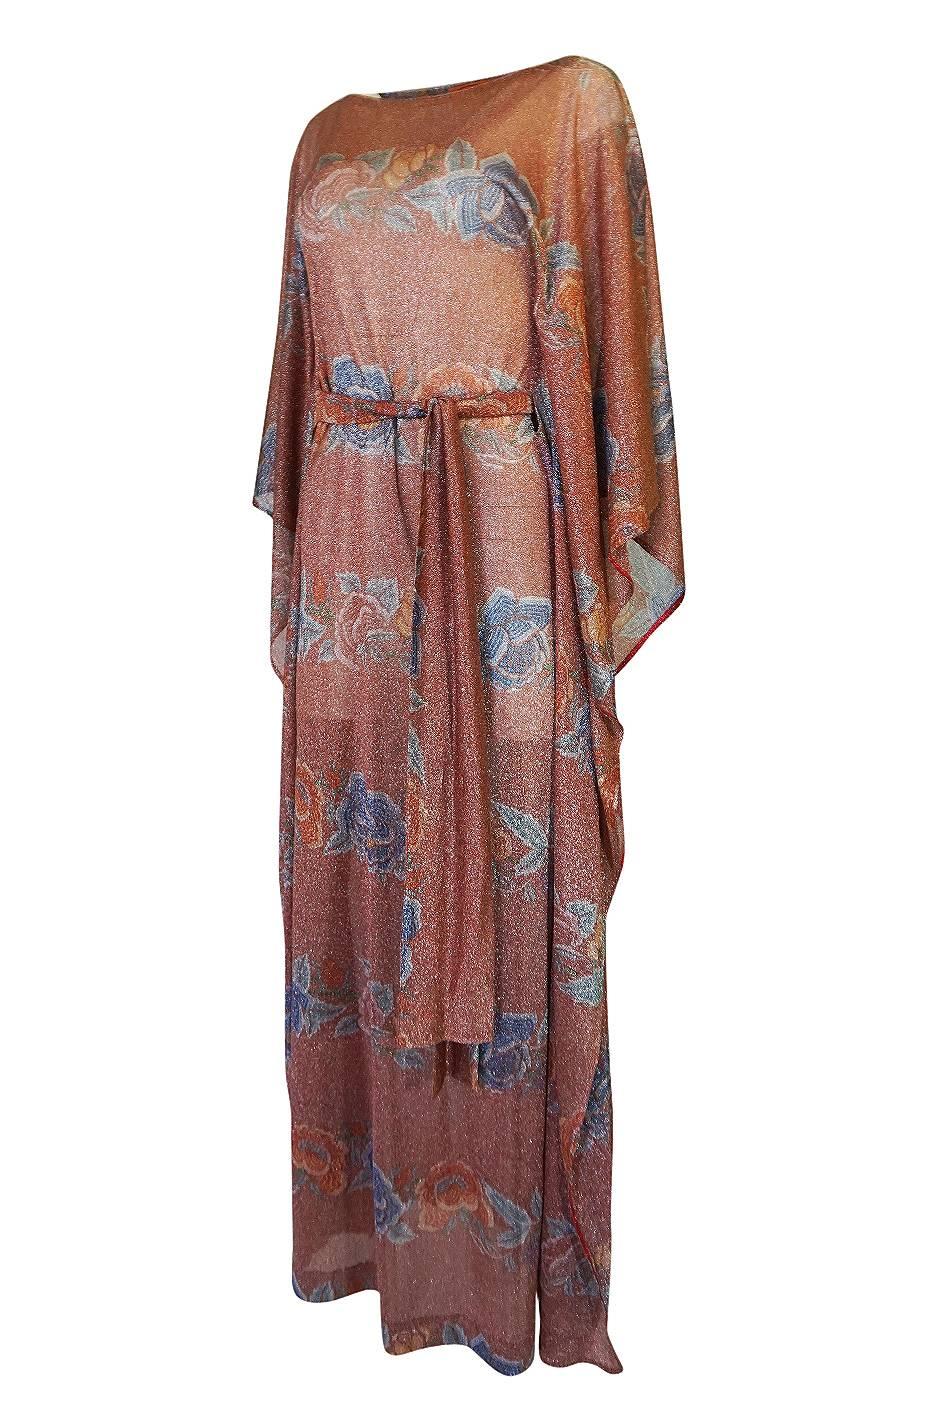 Missoni Floral Print Metallic Lurex Caftan Dress, circa 1972-73  In Excellent Condition In Rockwood, ON